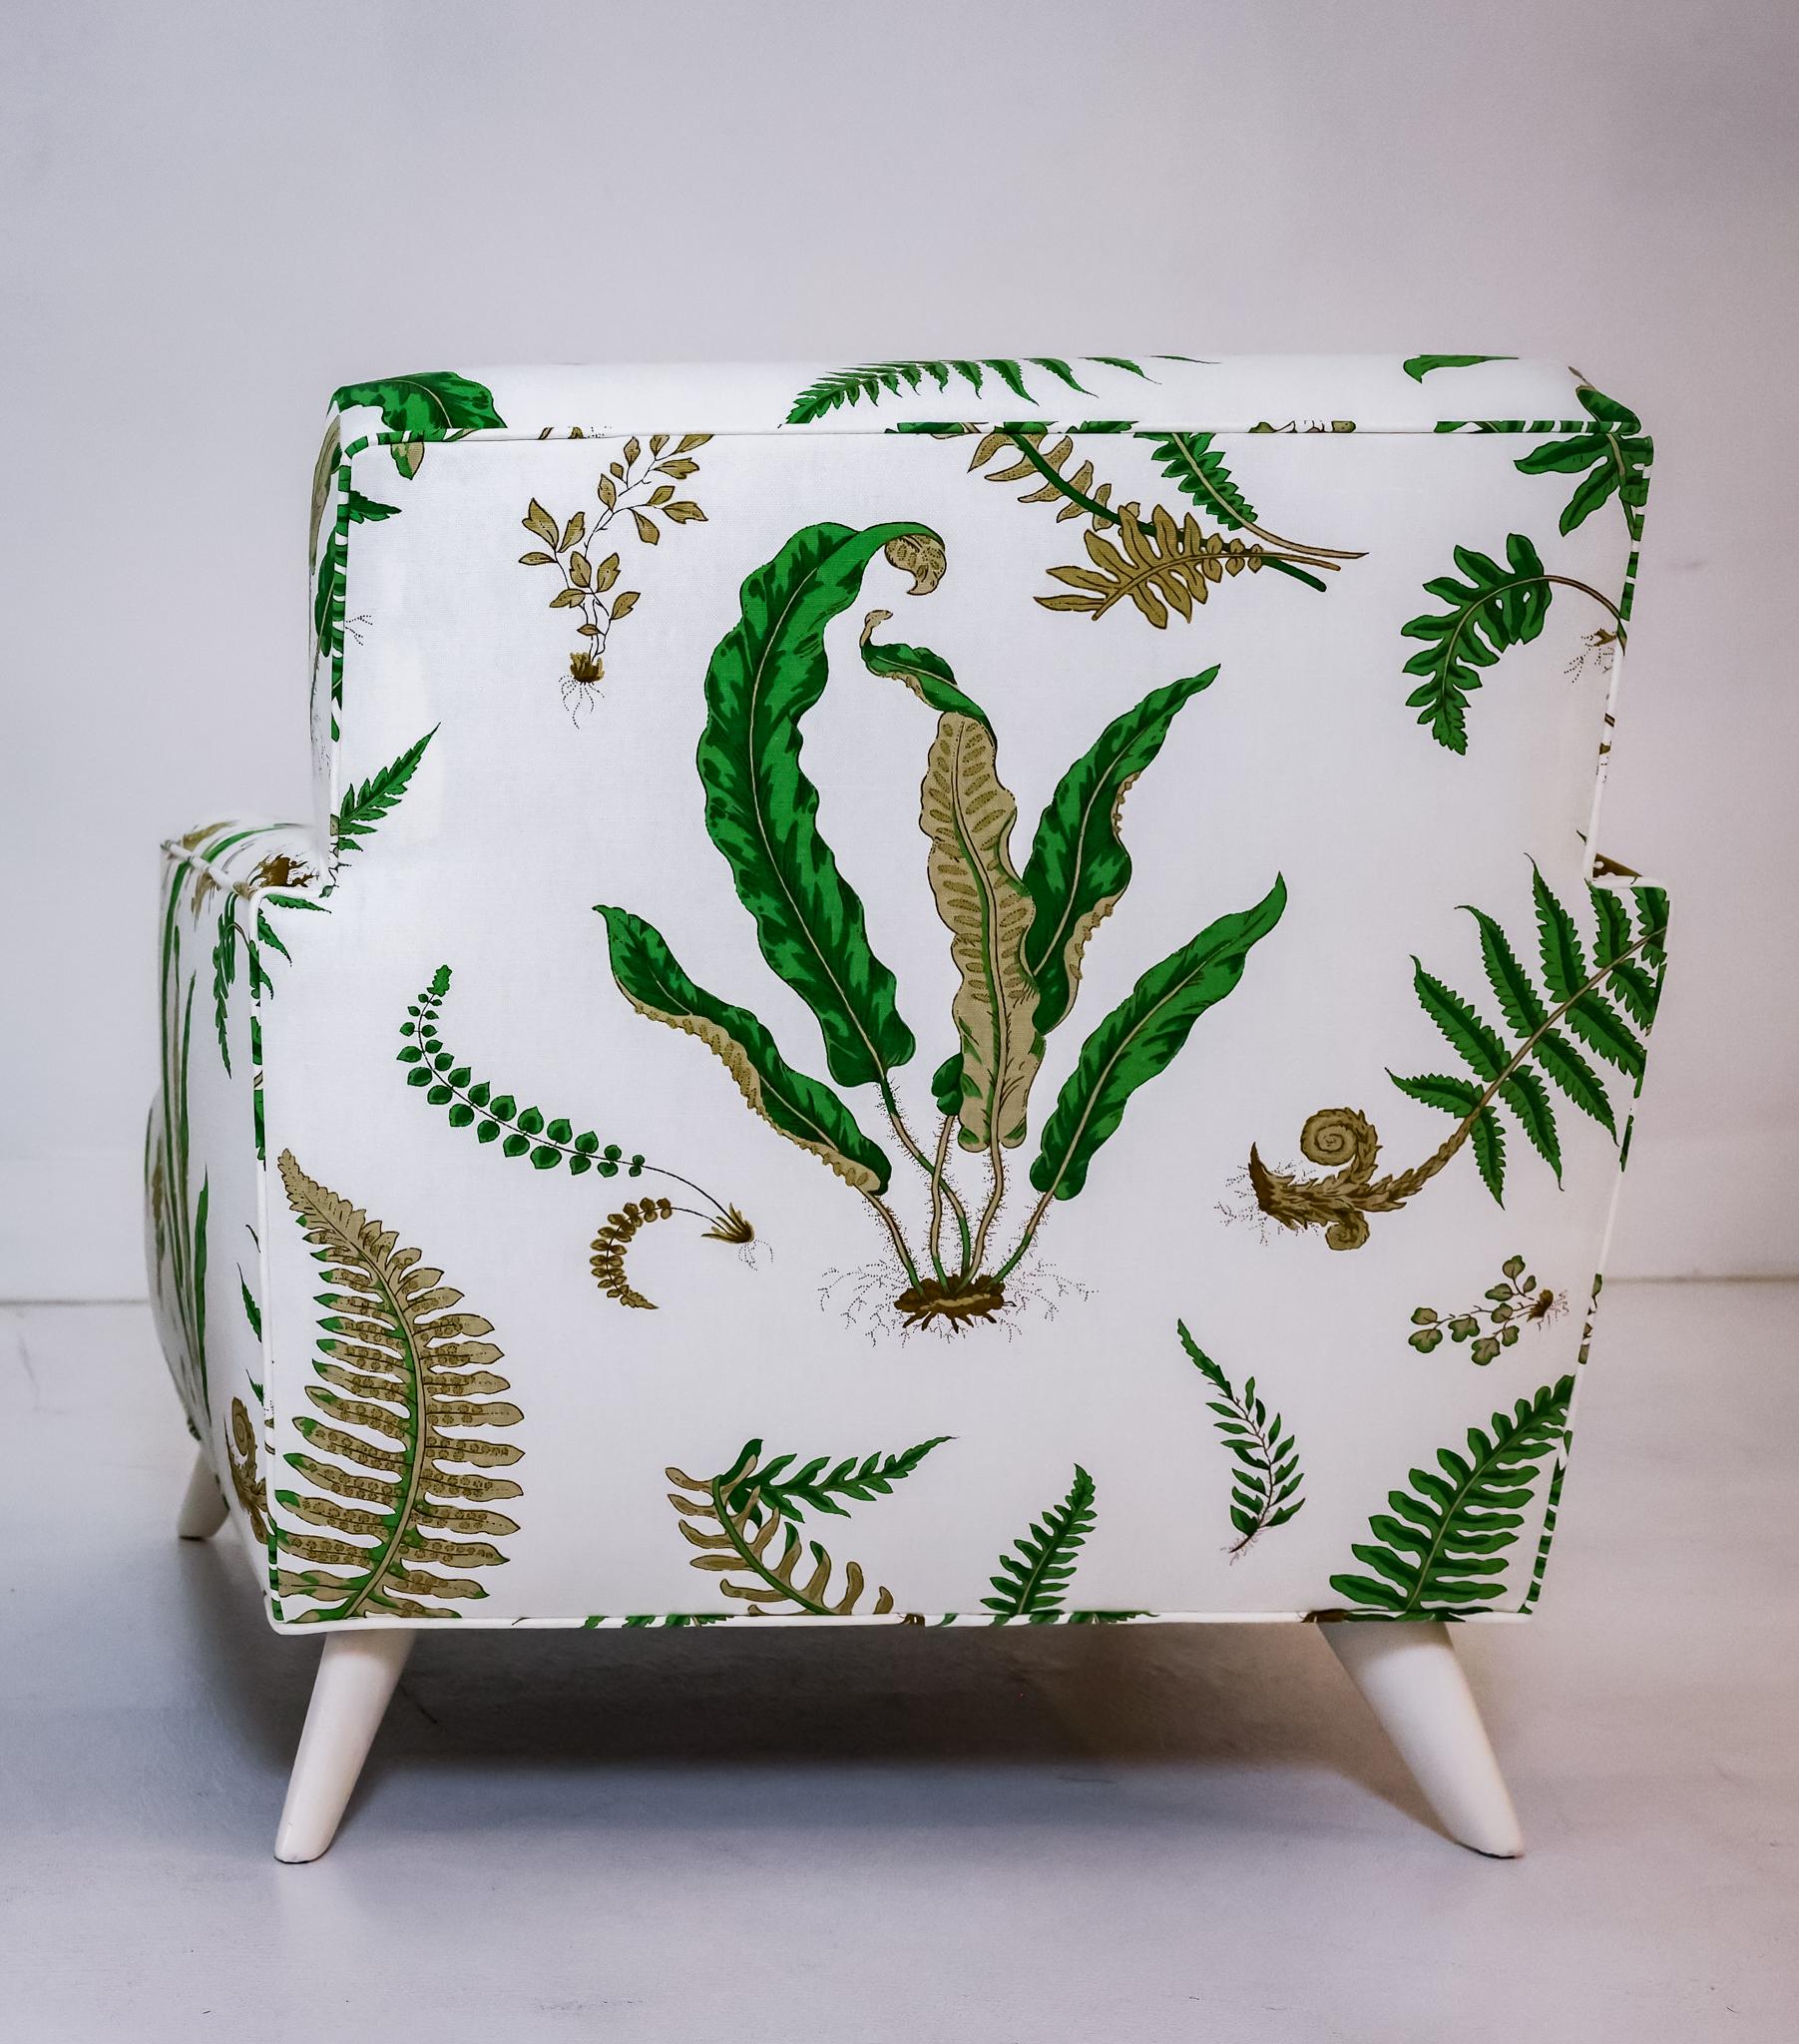 This is a pair of Billy Haines' most popular designs, the Seniah Chair # 13. The chairs have been fully restored and reupholstered in the original fern print (currently still in production), a Haines favorite. The legs are walnut and have been